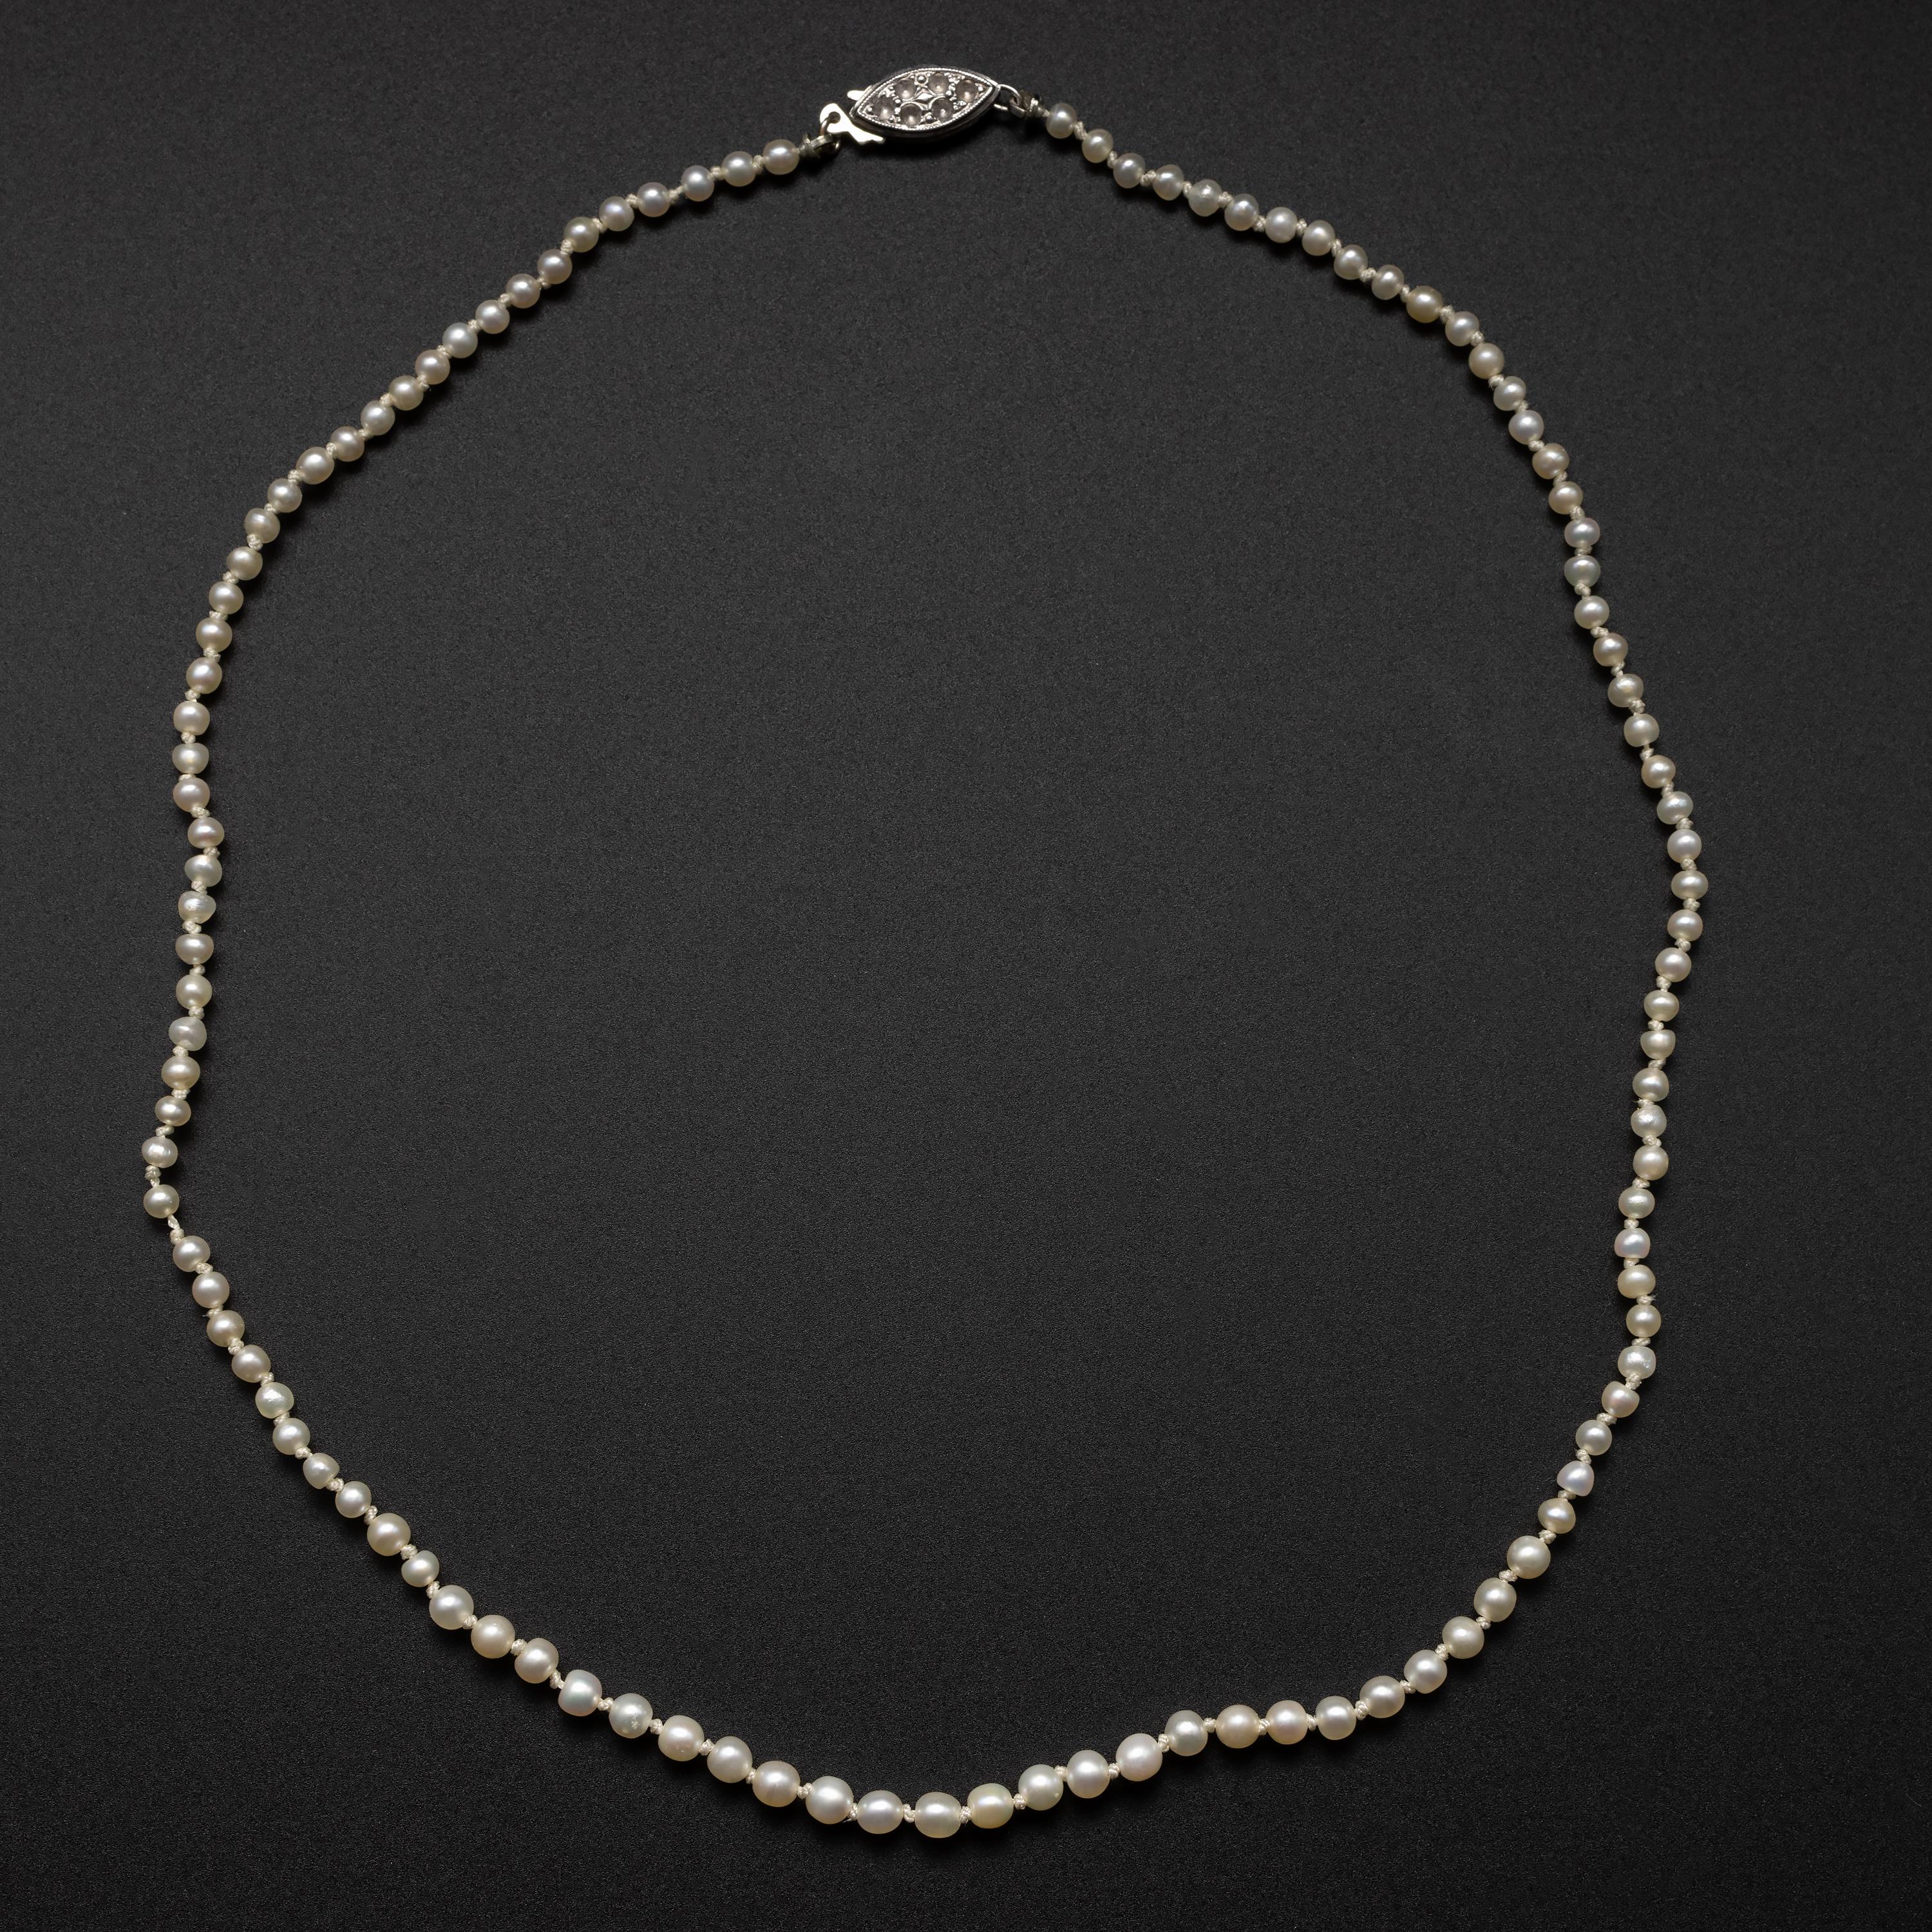 This Art Deco era (circa 1930s) pearl necklace measures a brief 15 ½ inches and is composed of 111 natural, uncultured saltwater pearls. The small and luminous pearls measure from 2.64mm to 3.62mm and they display beautiful orient, which is the